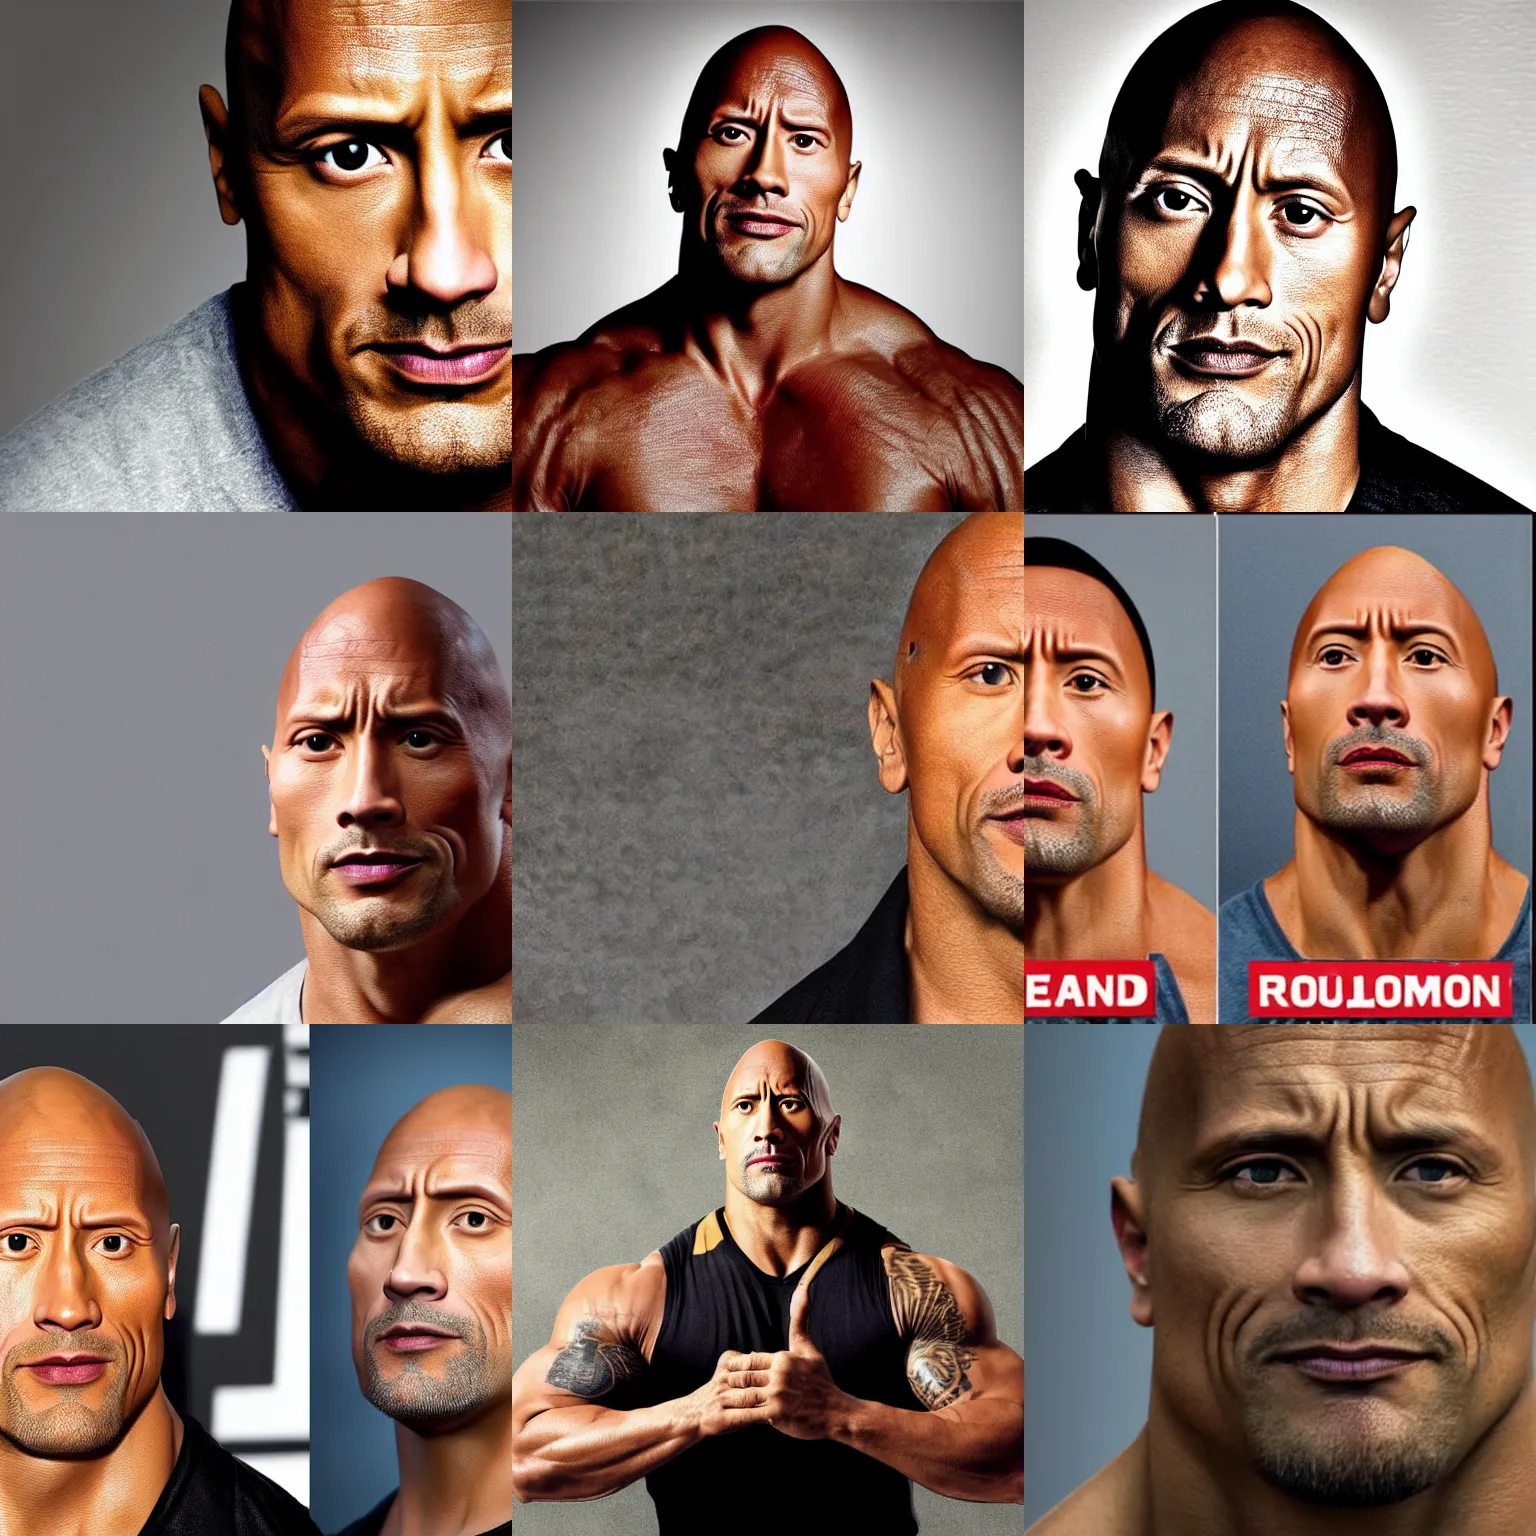 prompthunt: Dwayne Johnson is looking intensely at the camera with